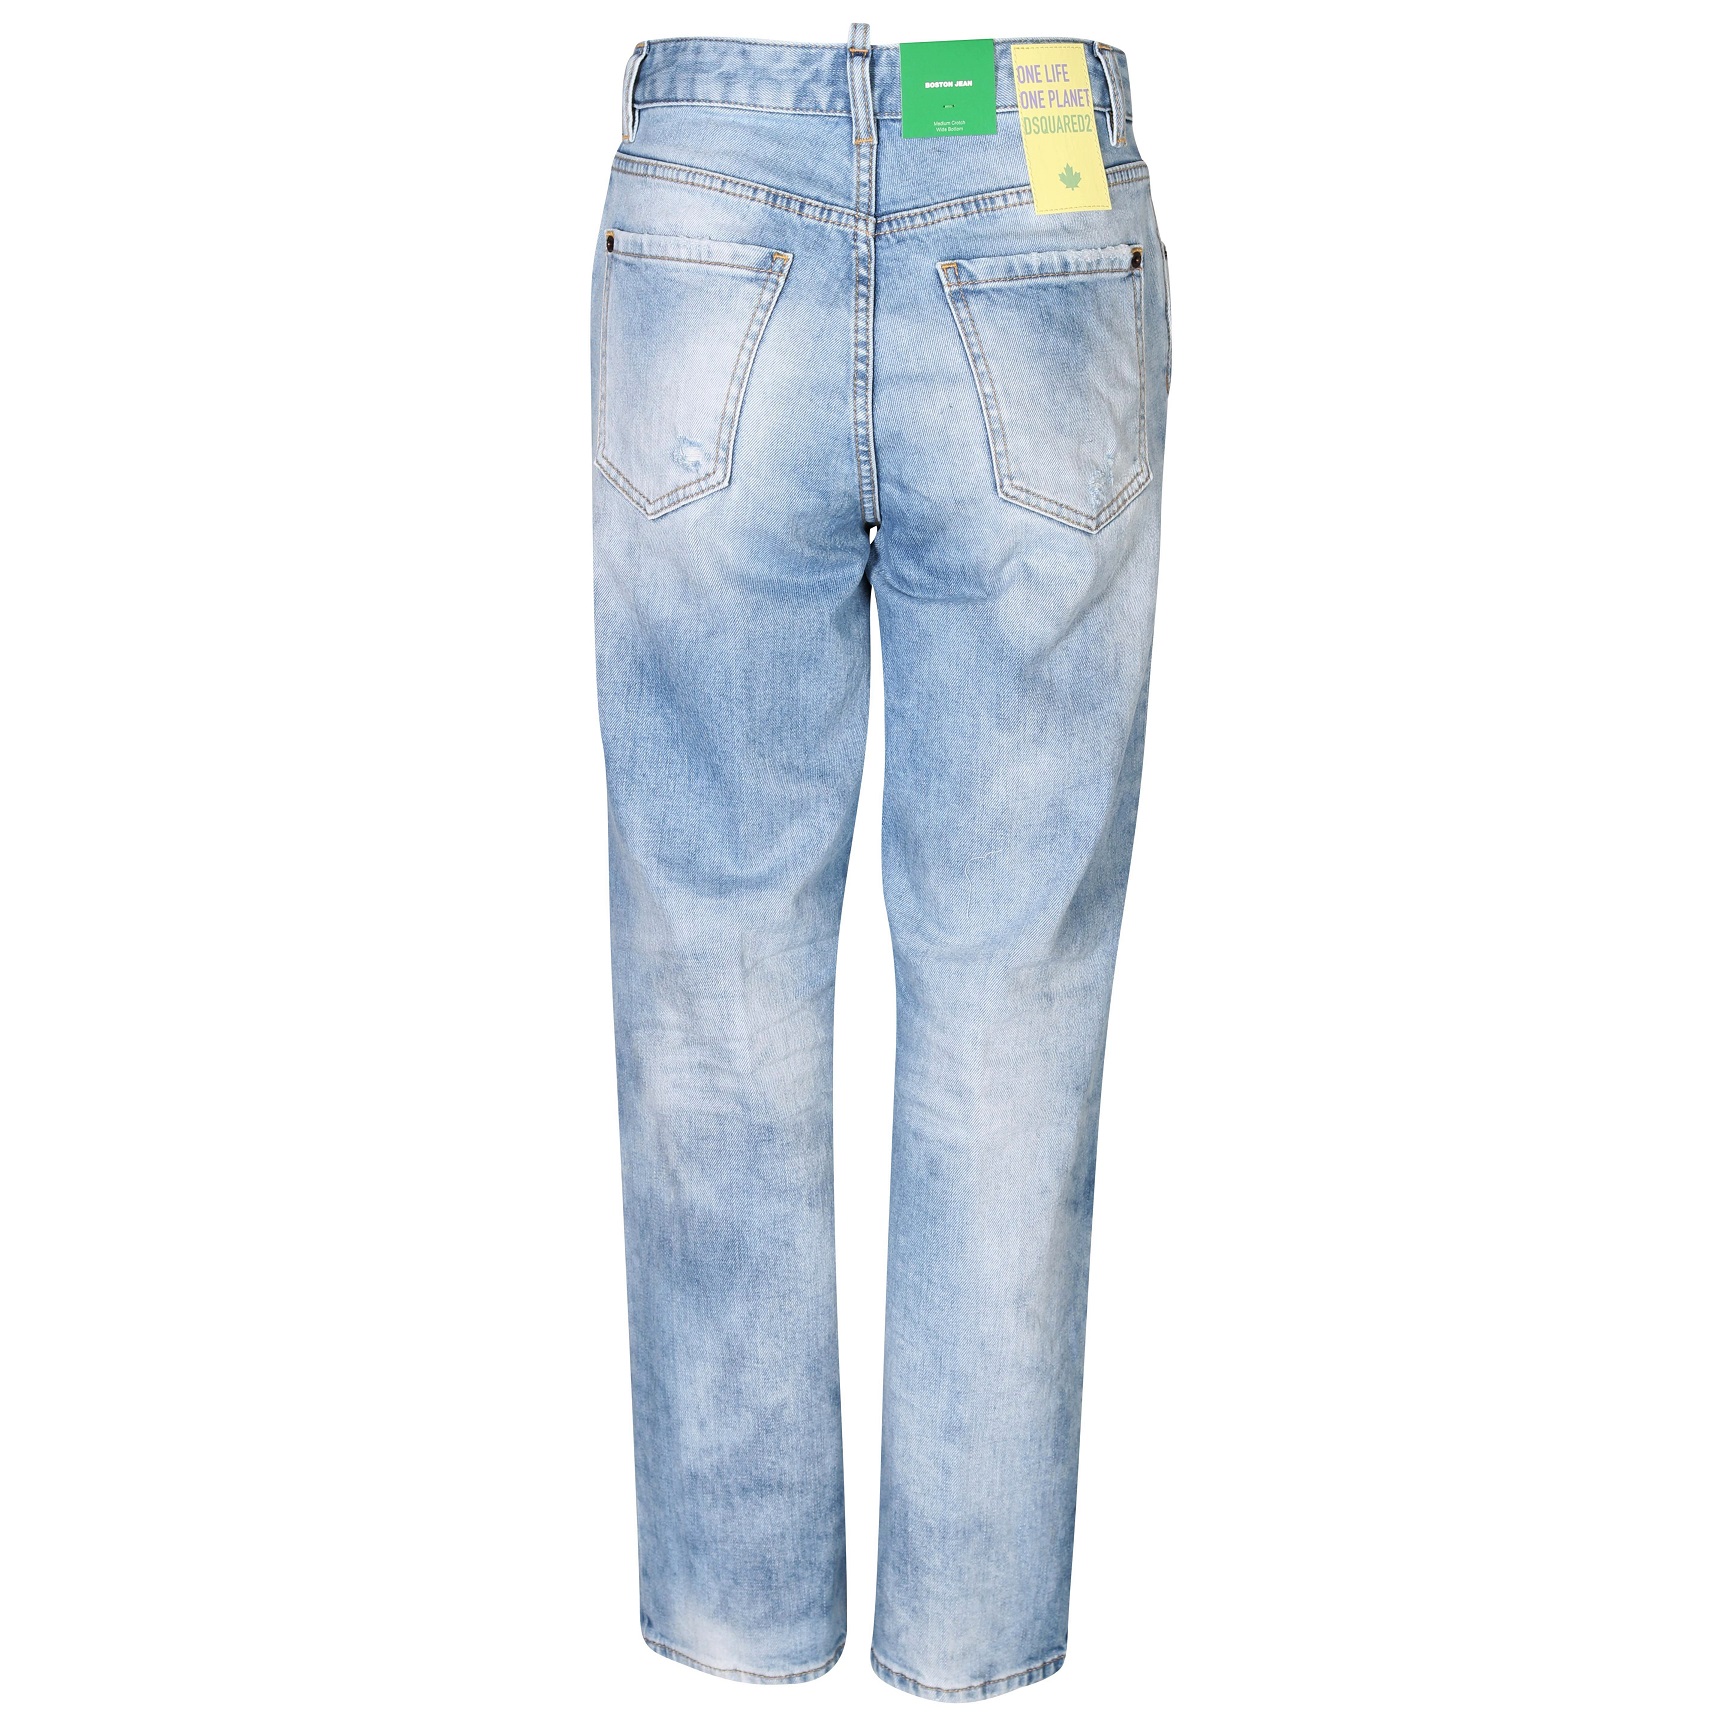 DSQUARED2 Jeans Boston in Washed Light Blue